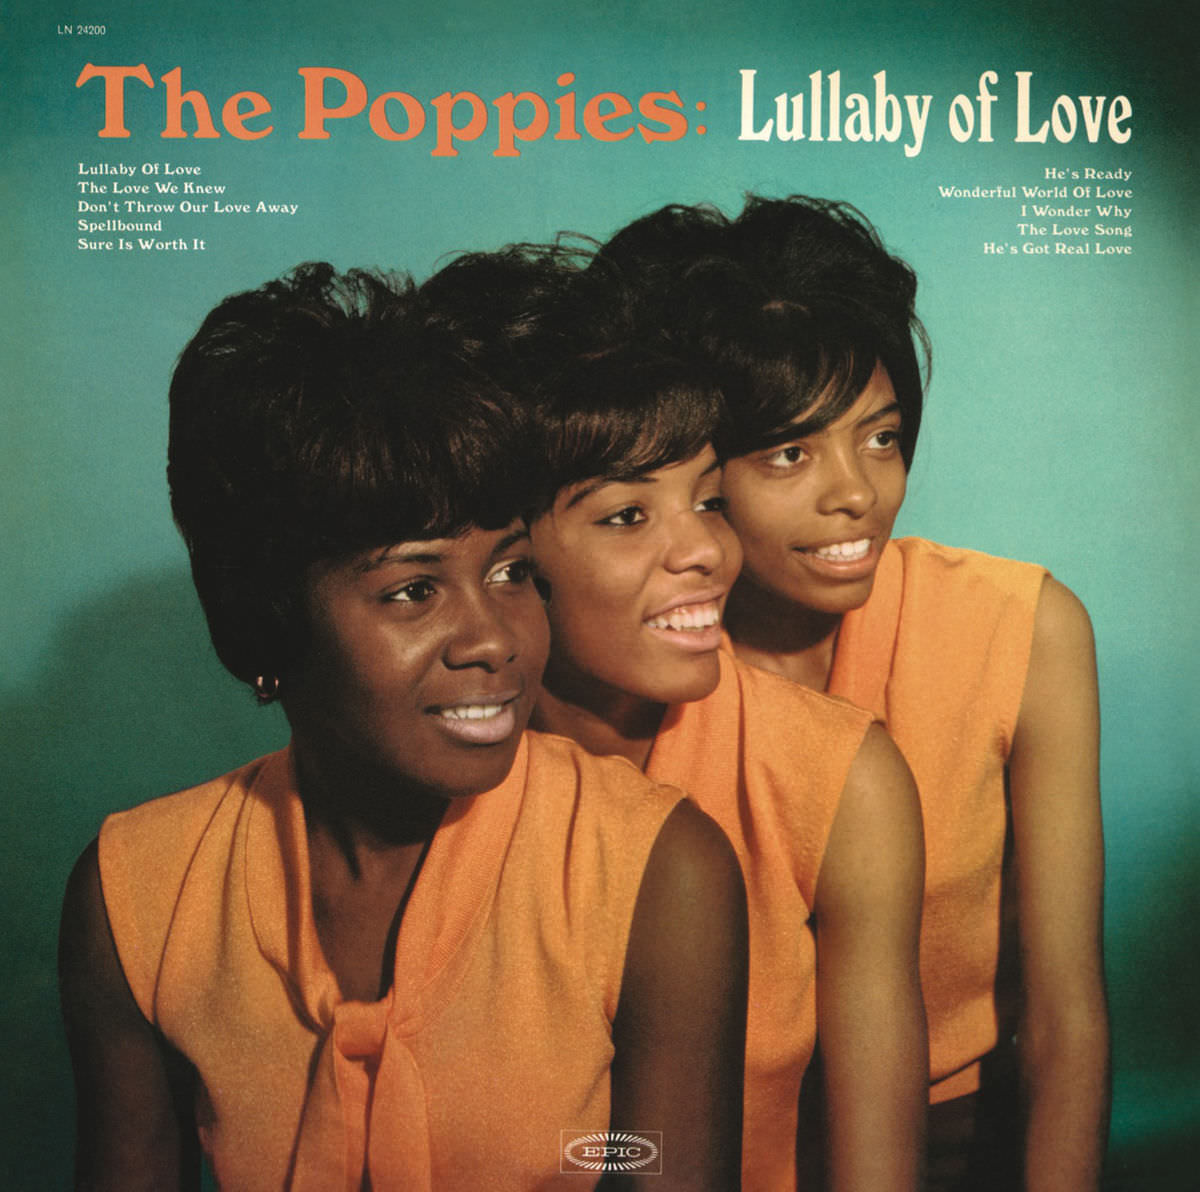 The Poppies – Lullaby of Love (1966/2014) [FLAC 24bit/96kHz]